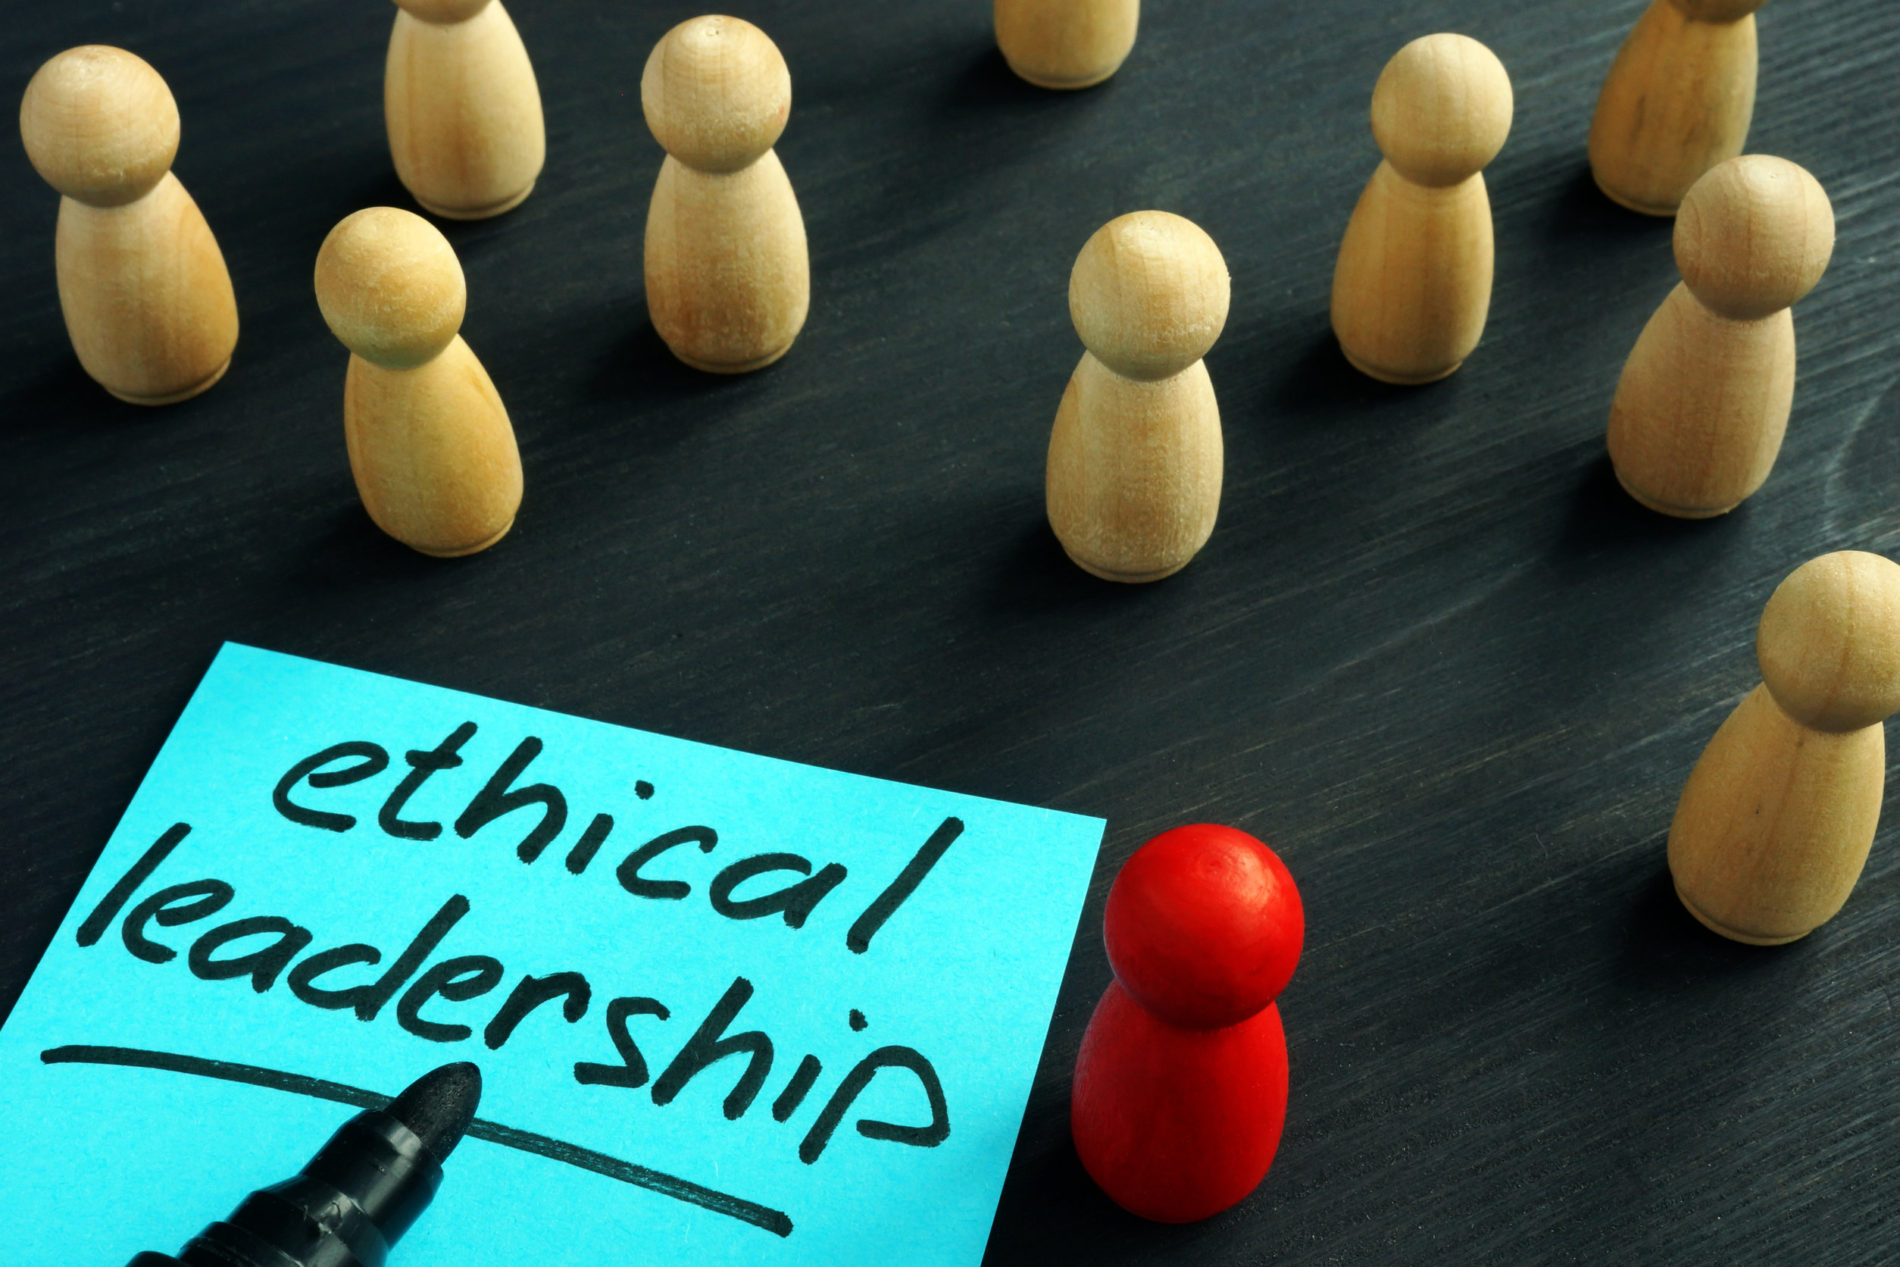 Five Big Ethical Issues for Leaders